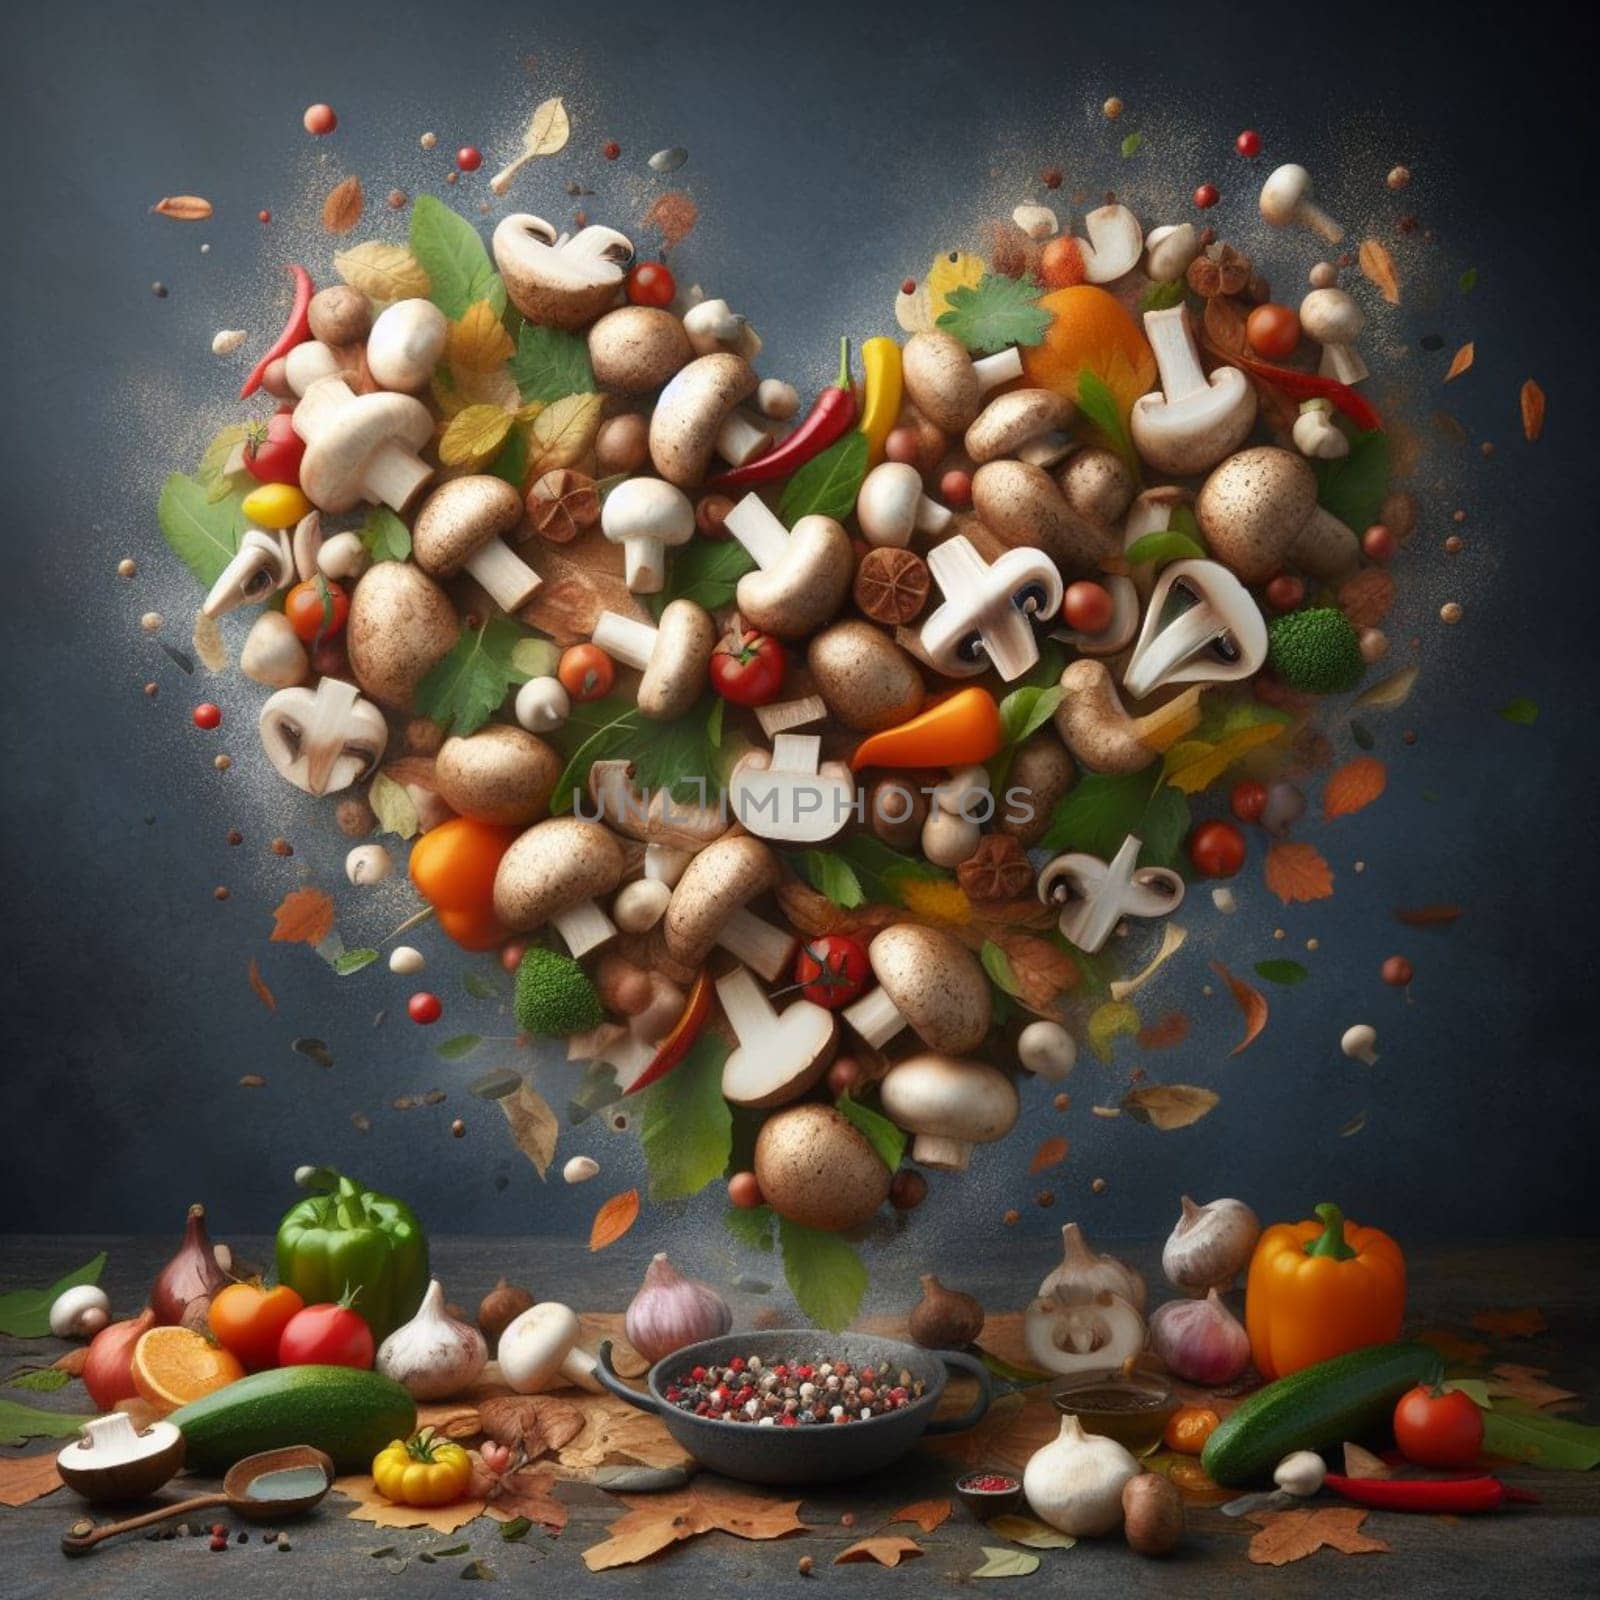 heart shaped group of fall winter porcini and veggies collage, healthy vegetarian cook soup mix by verbano